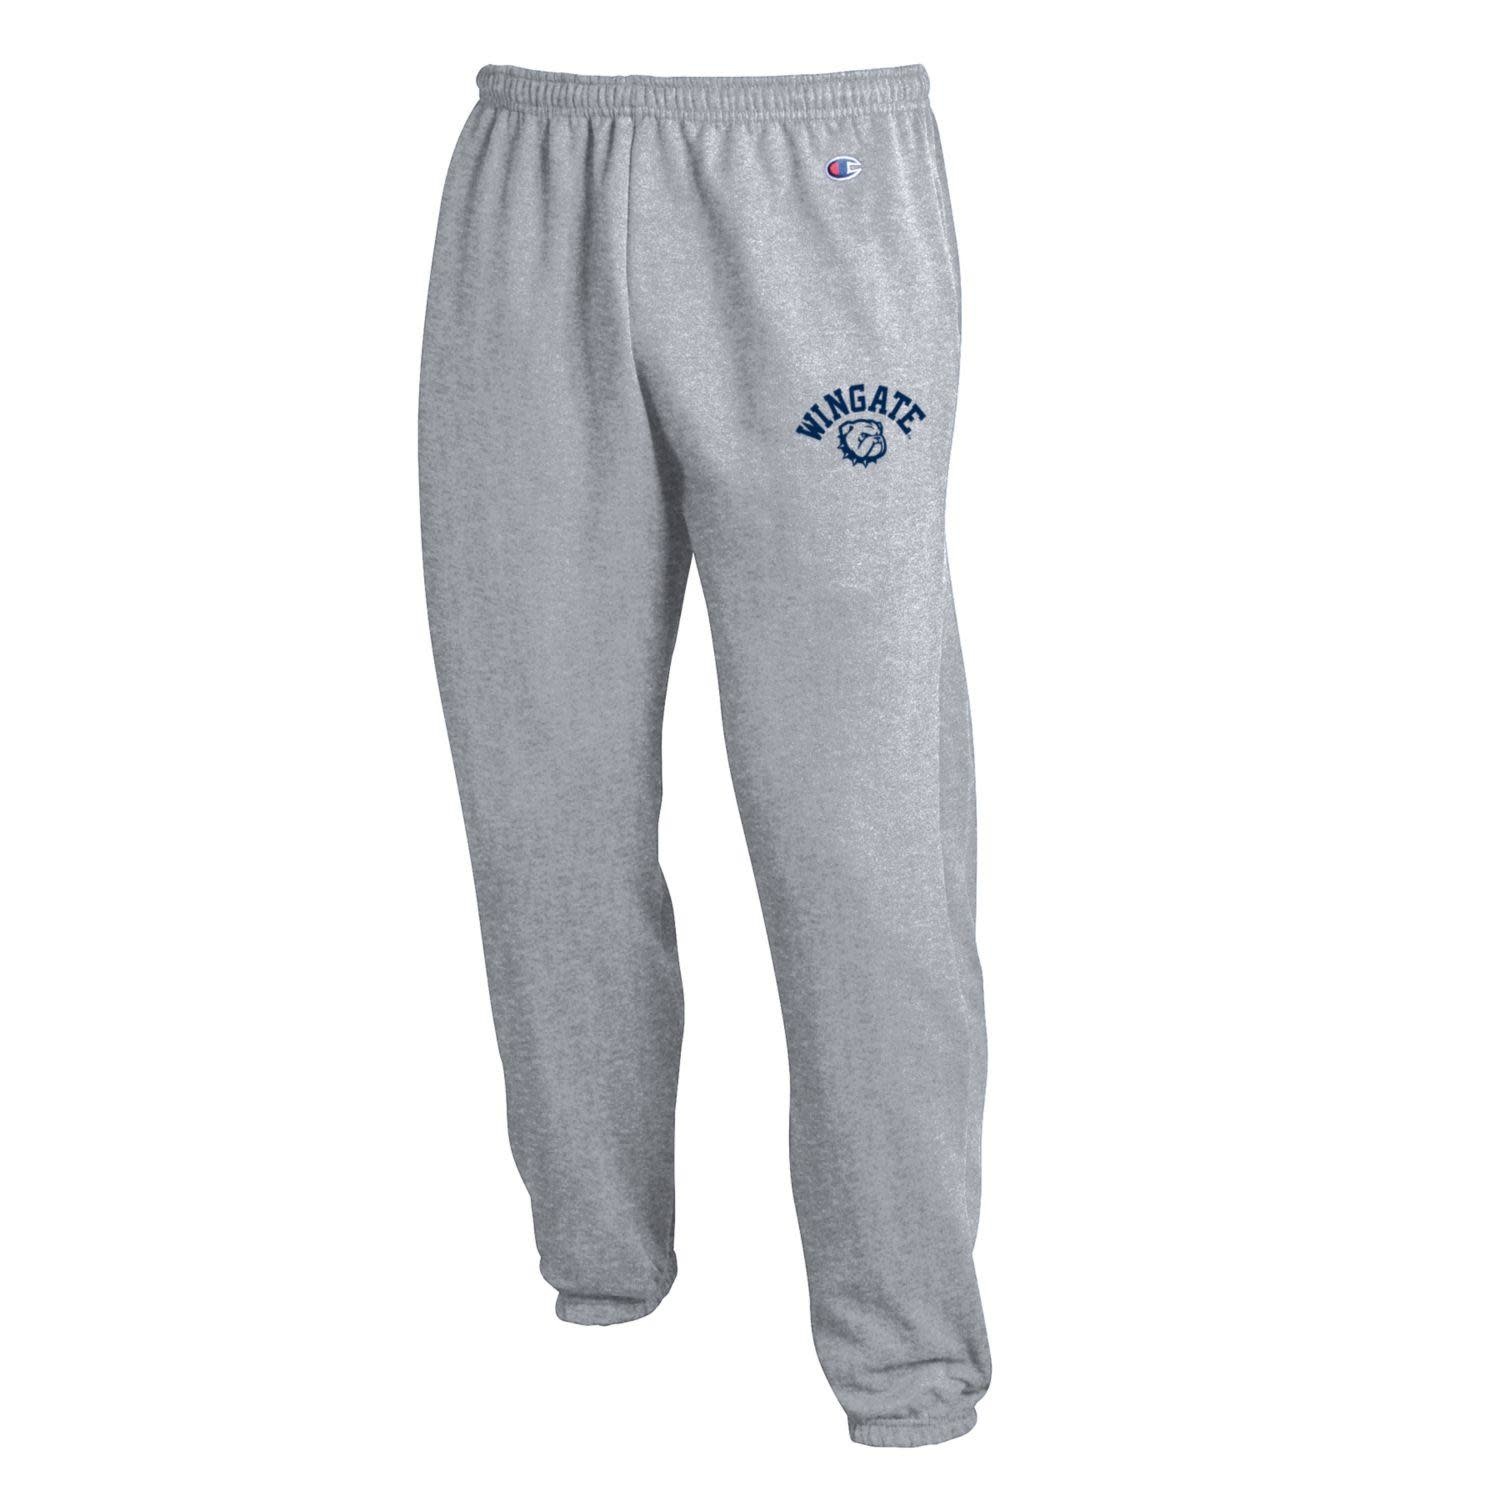 Heather Grey Powerblend Banded Pant - Wingate Outfitters